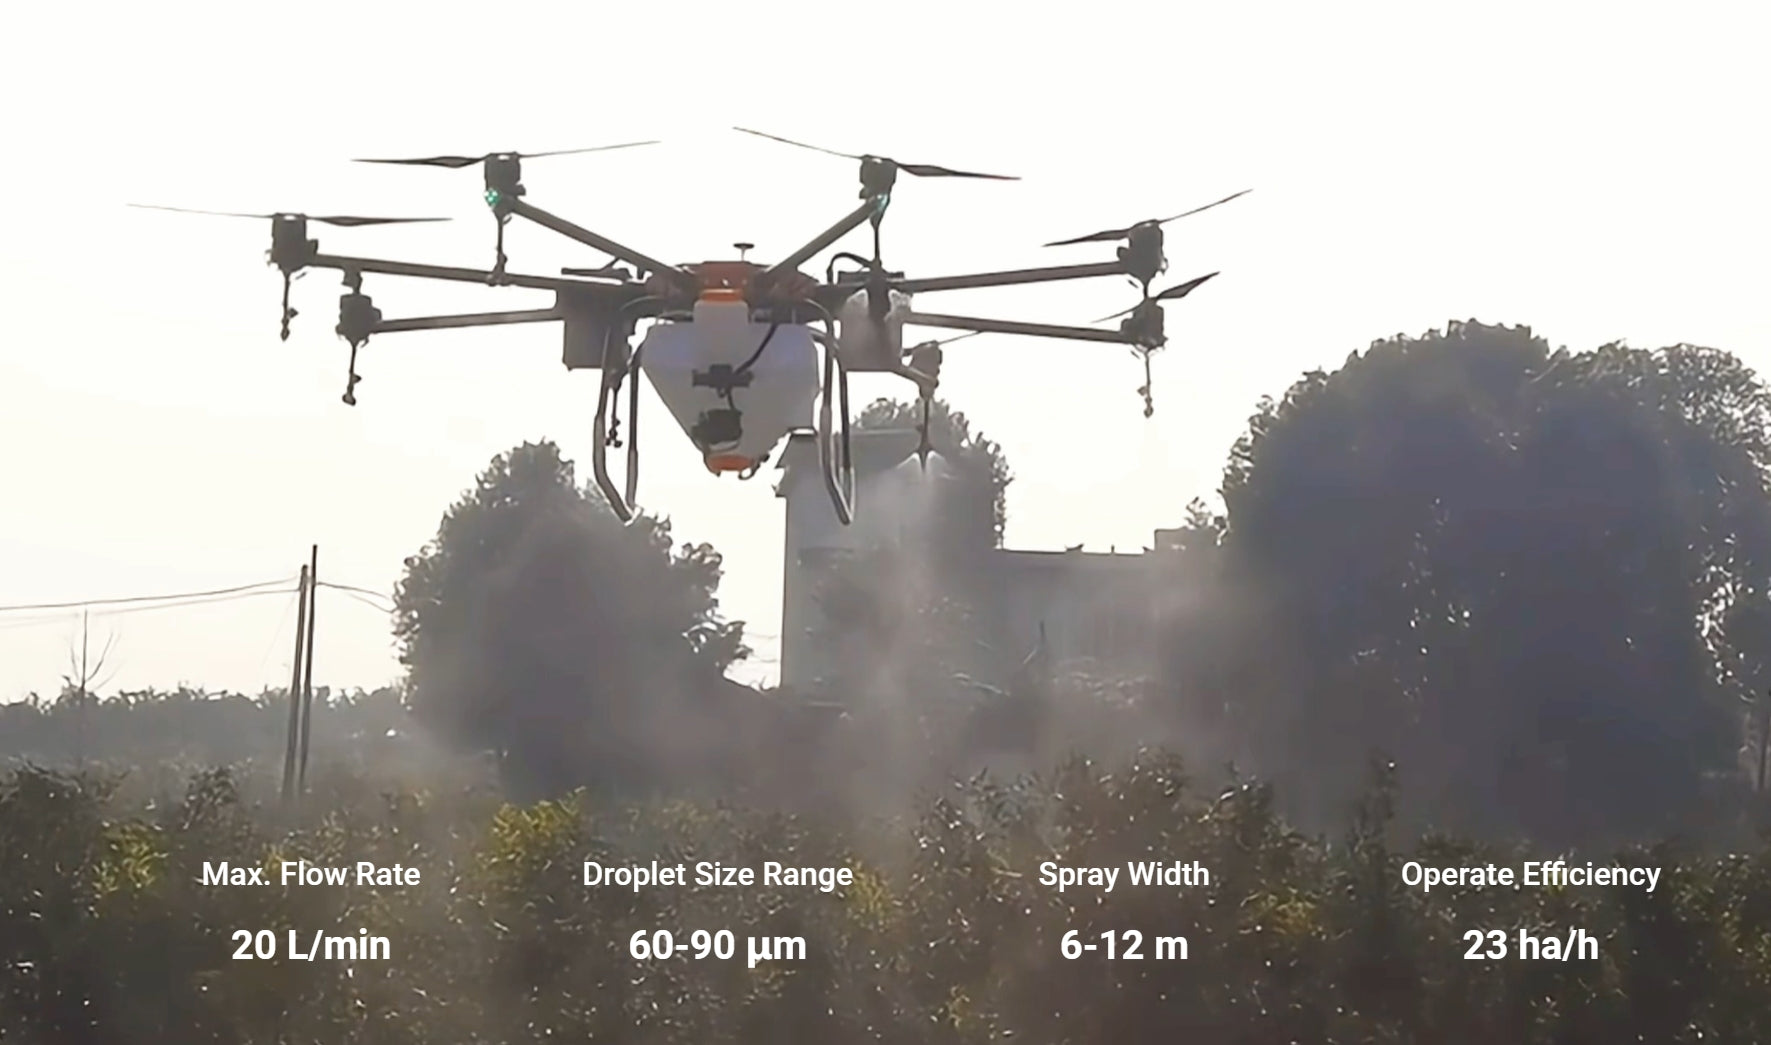 H120 Agriculture Drone, Max. Flow Rate Droplet Size Range Spray Width Operate Efficiency 20 L